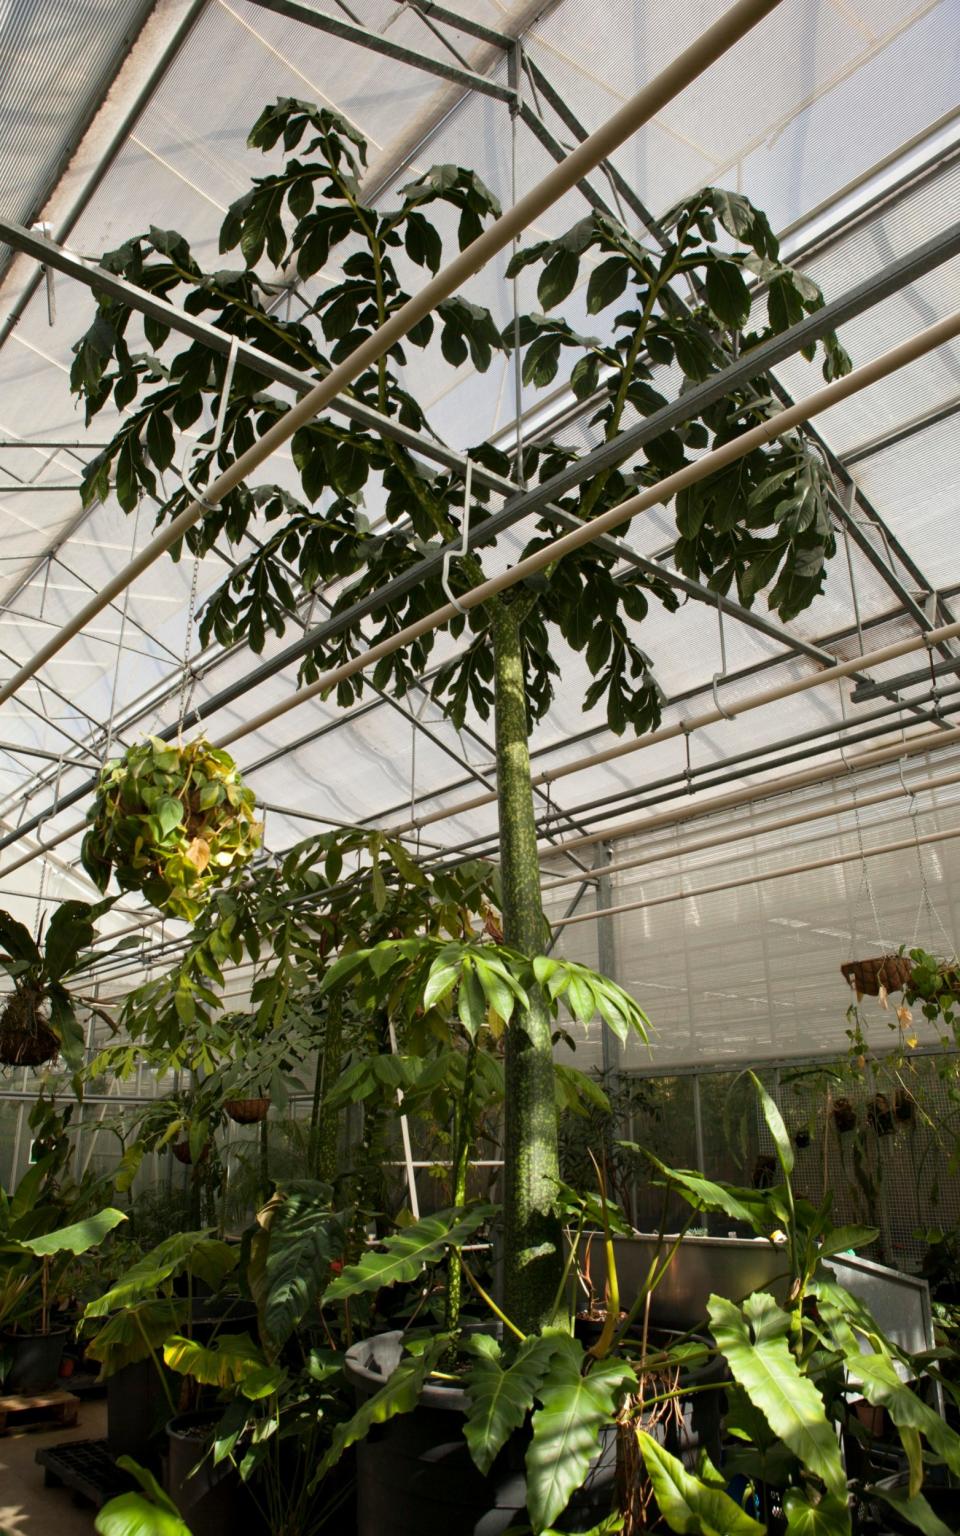 The Araceae collection, including propagated corpse flowers, at the nursery  - Credit: Rii Schroer